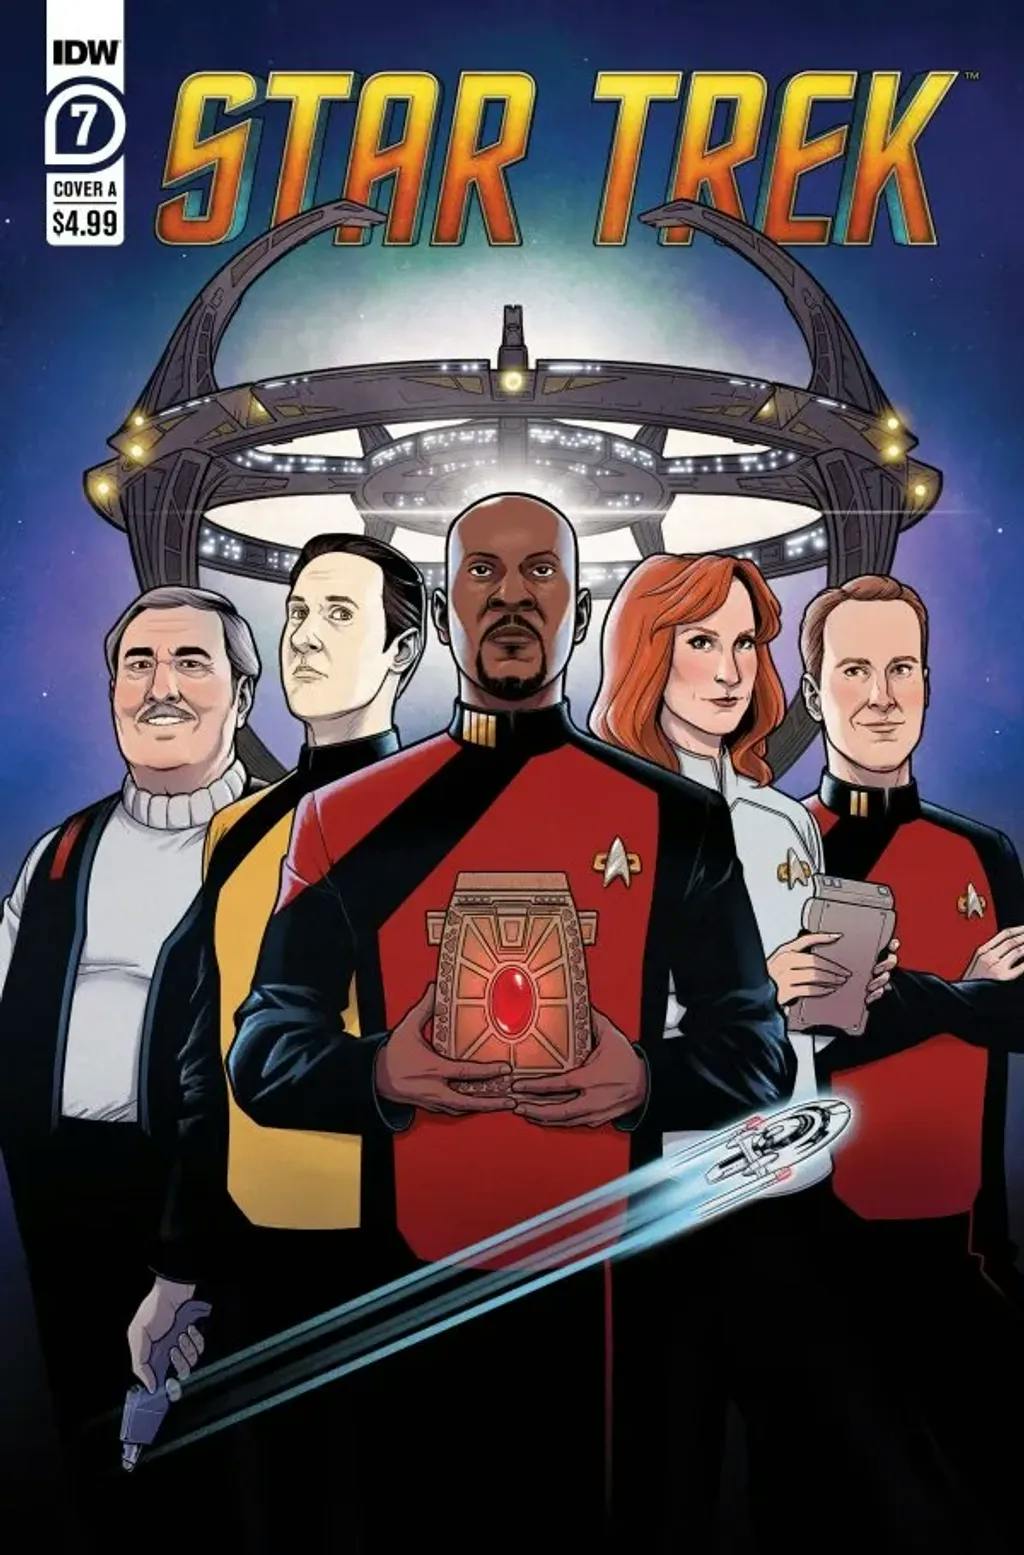 Star Trek #7 By Collin Kelly and Mike Feehan